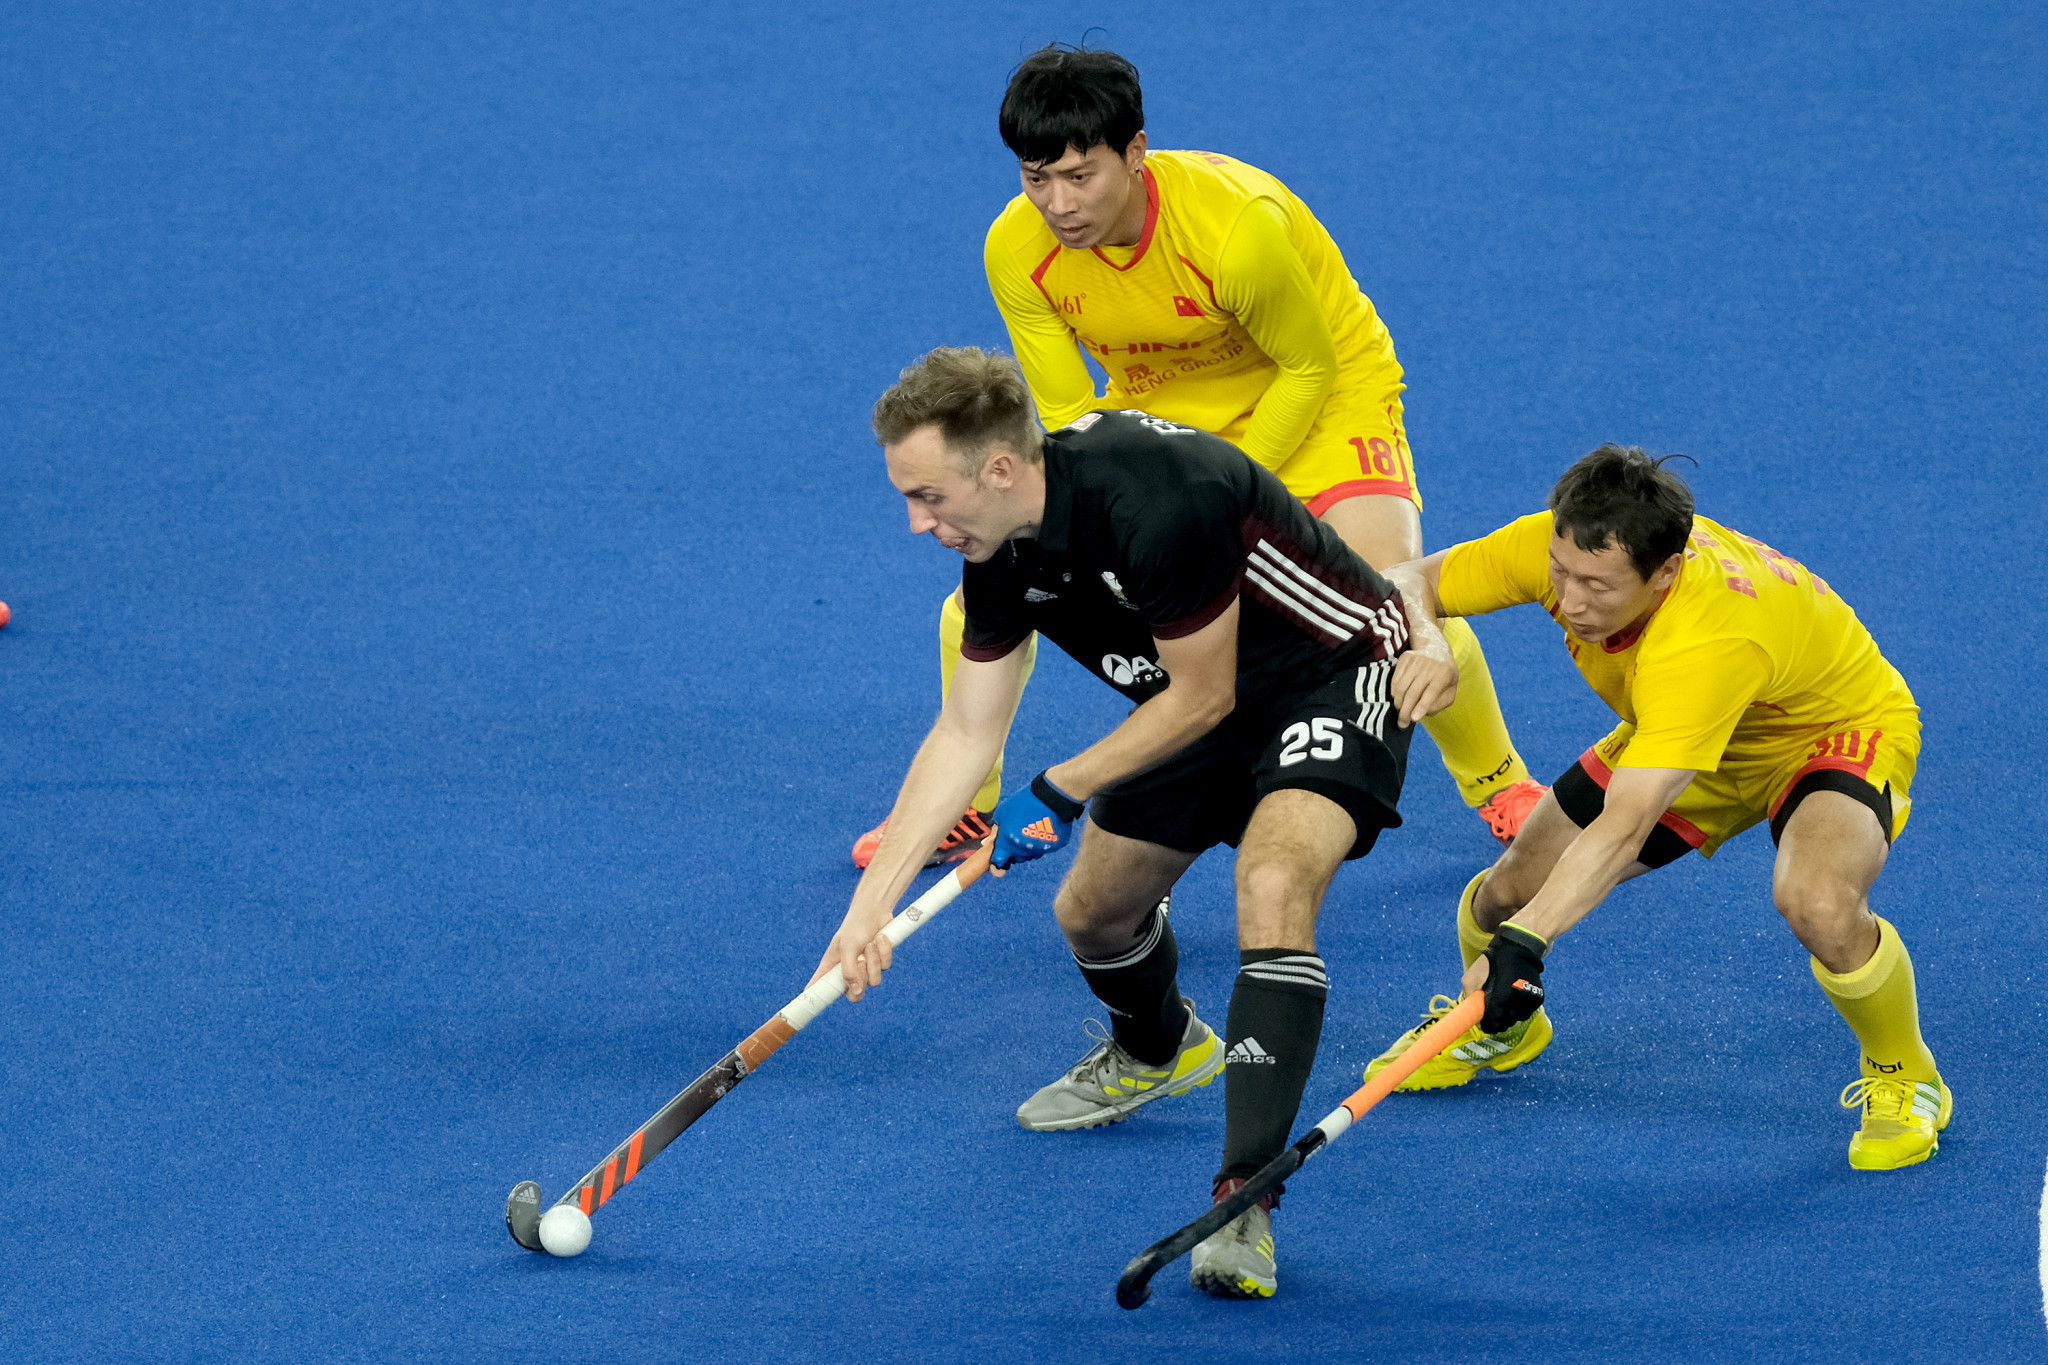 Wales beat China 3-2 to claim a fifth-place finish at the International Hockey Federation Series Finals in Kuala Lumpur ©Getty Images